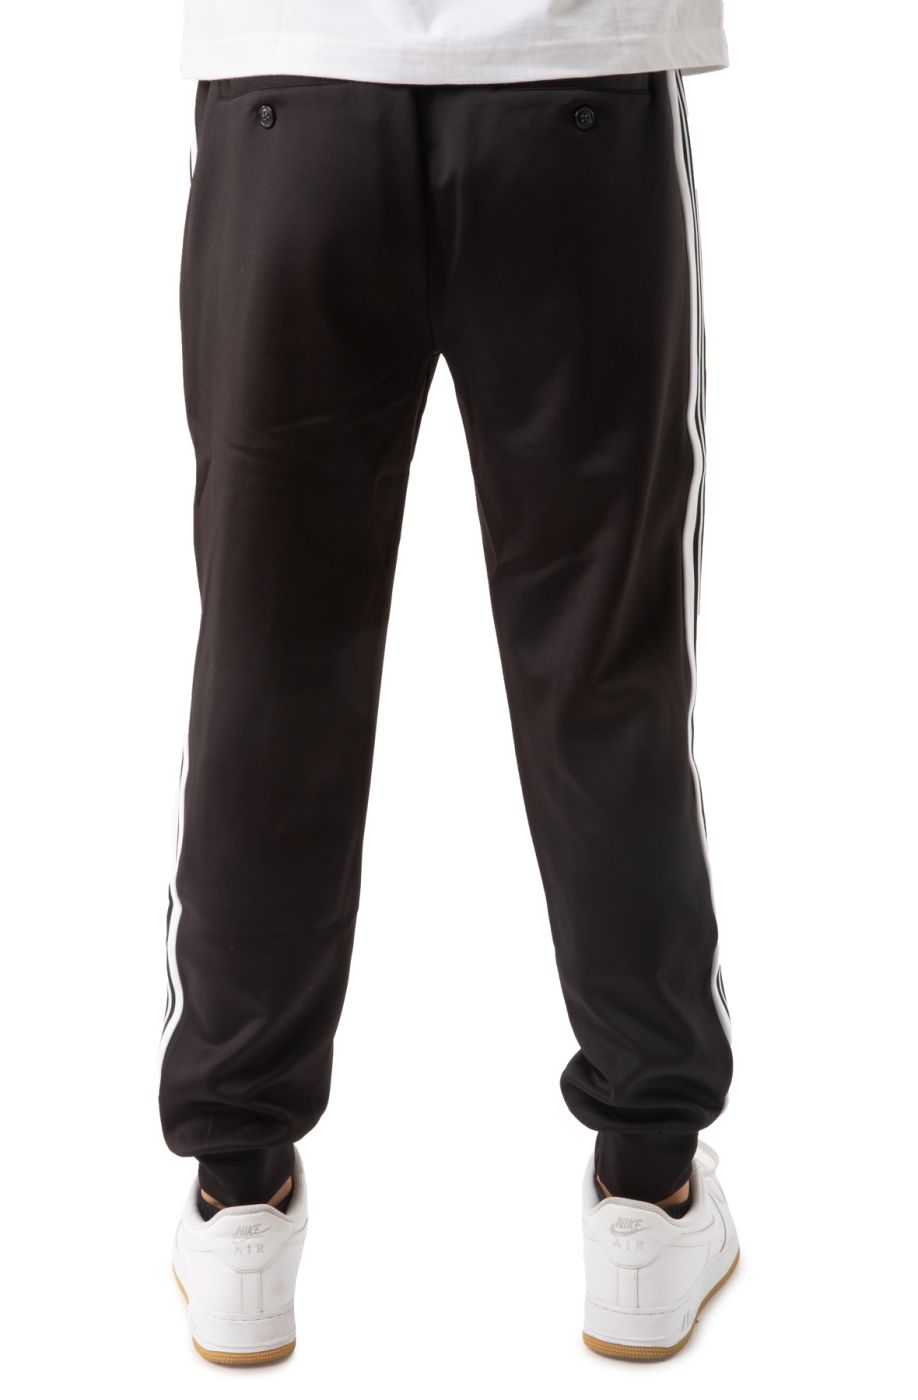 Planes Striped Track Pant